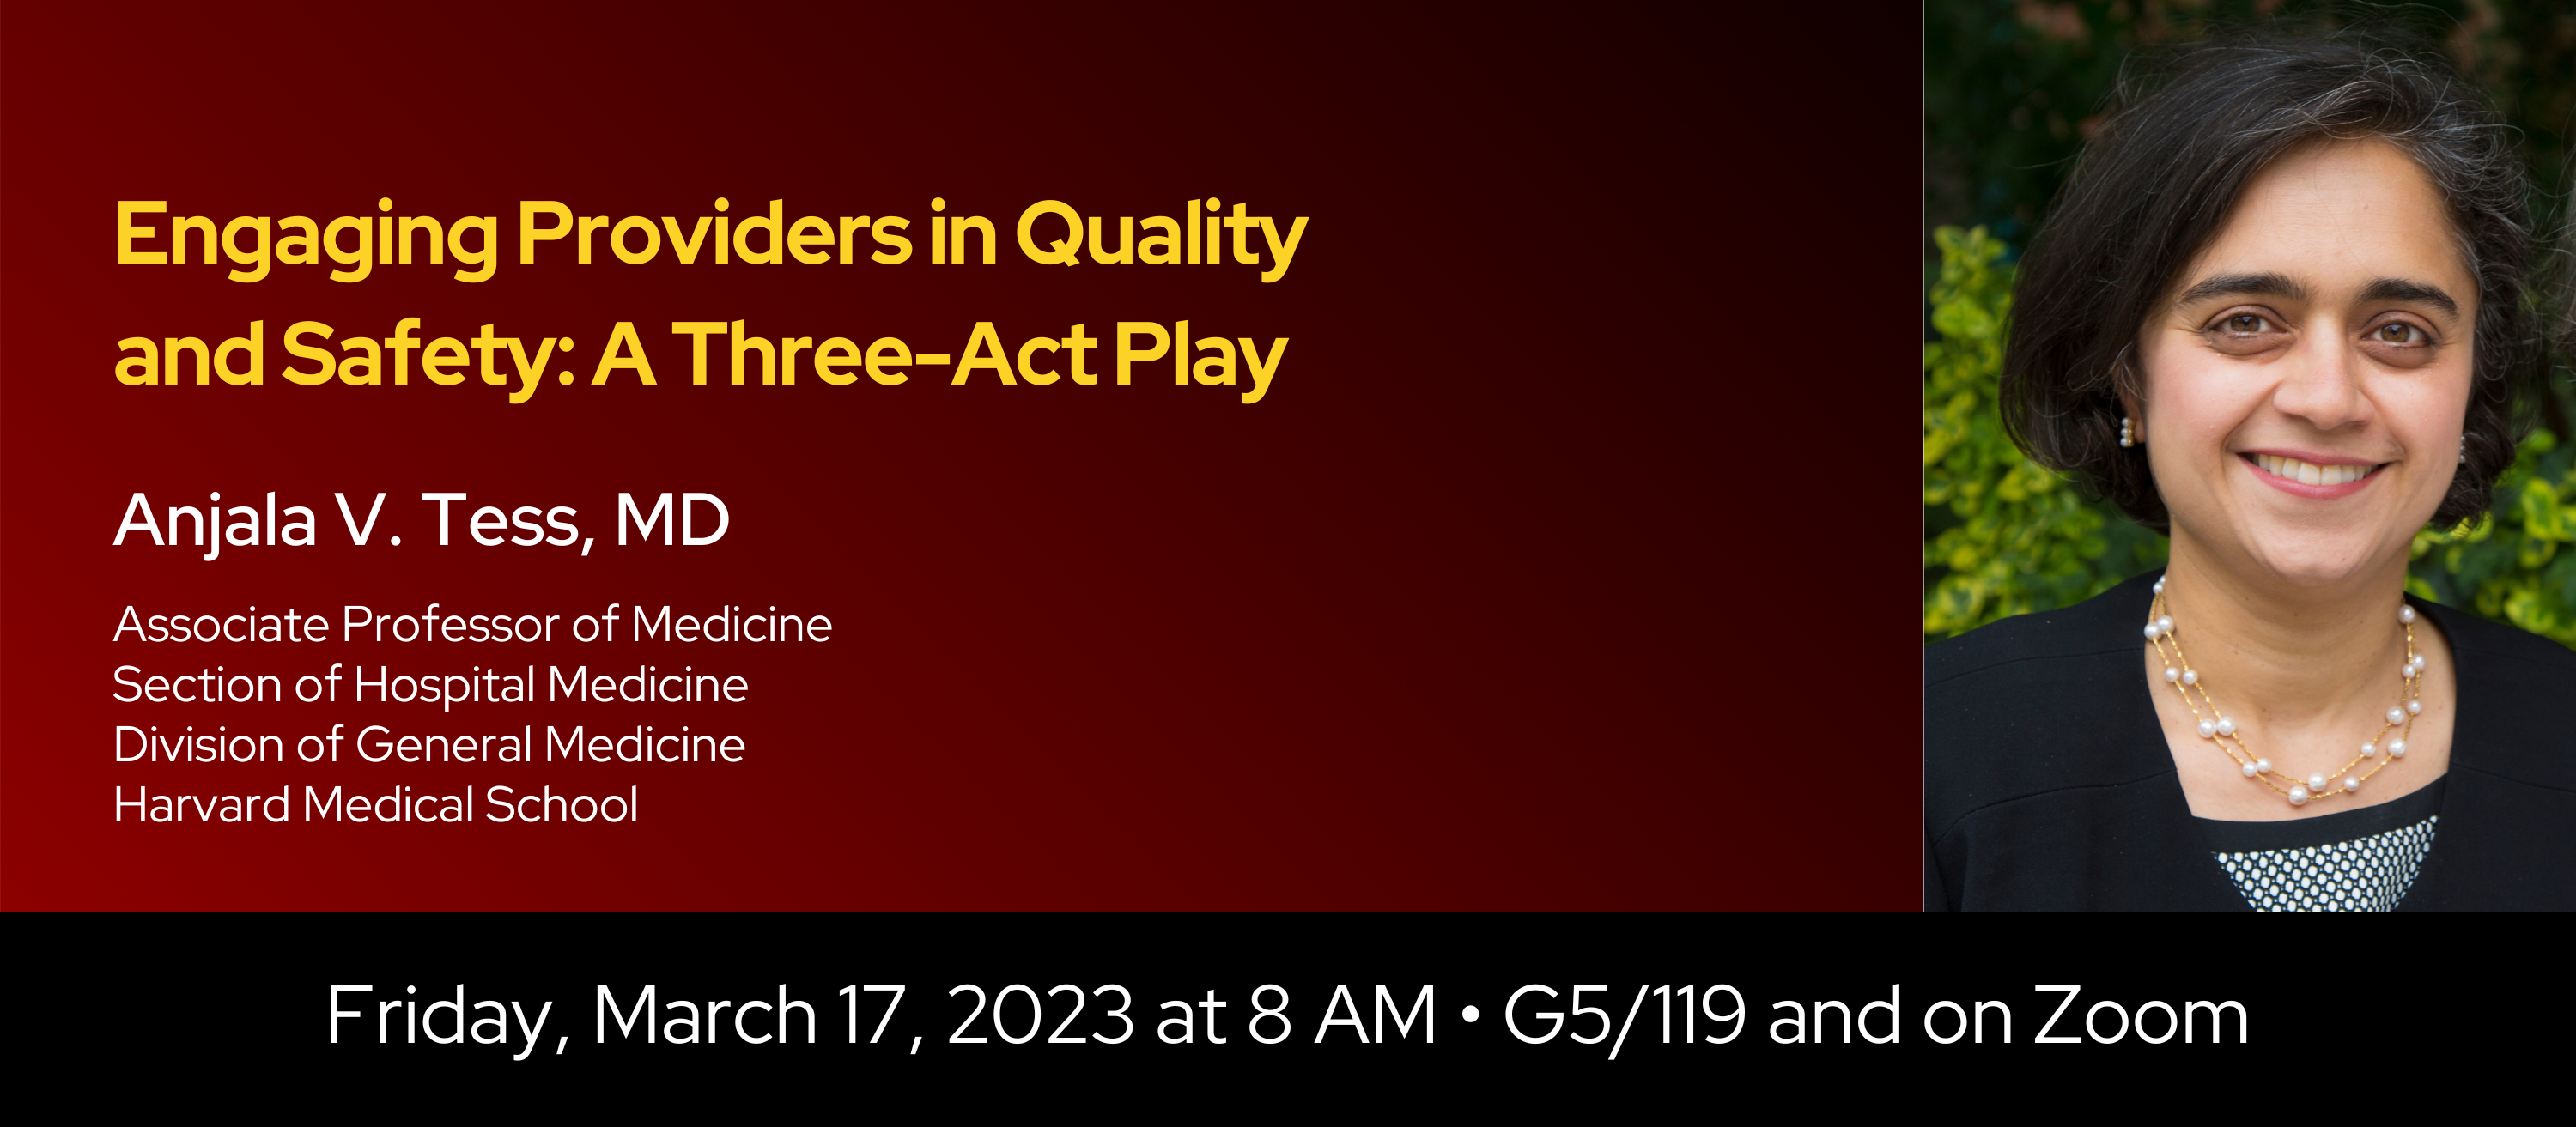 Title: Engaging Providers in Quality and Safety: A Three-Act Play